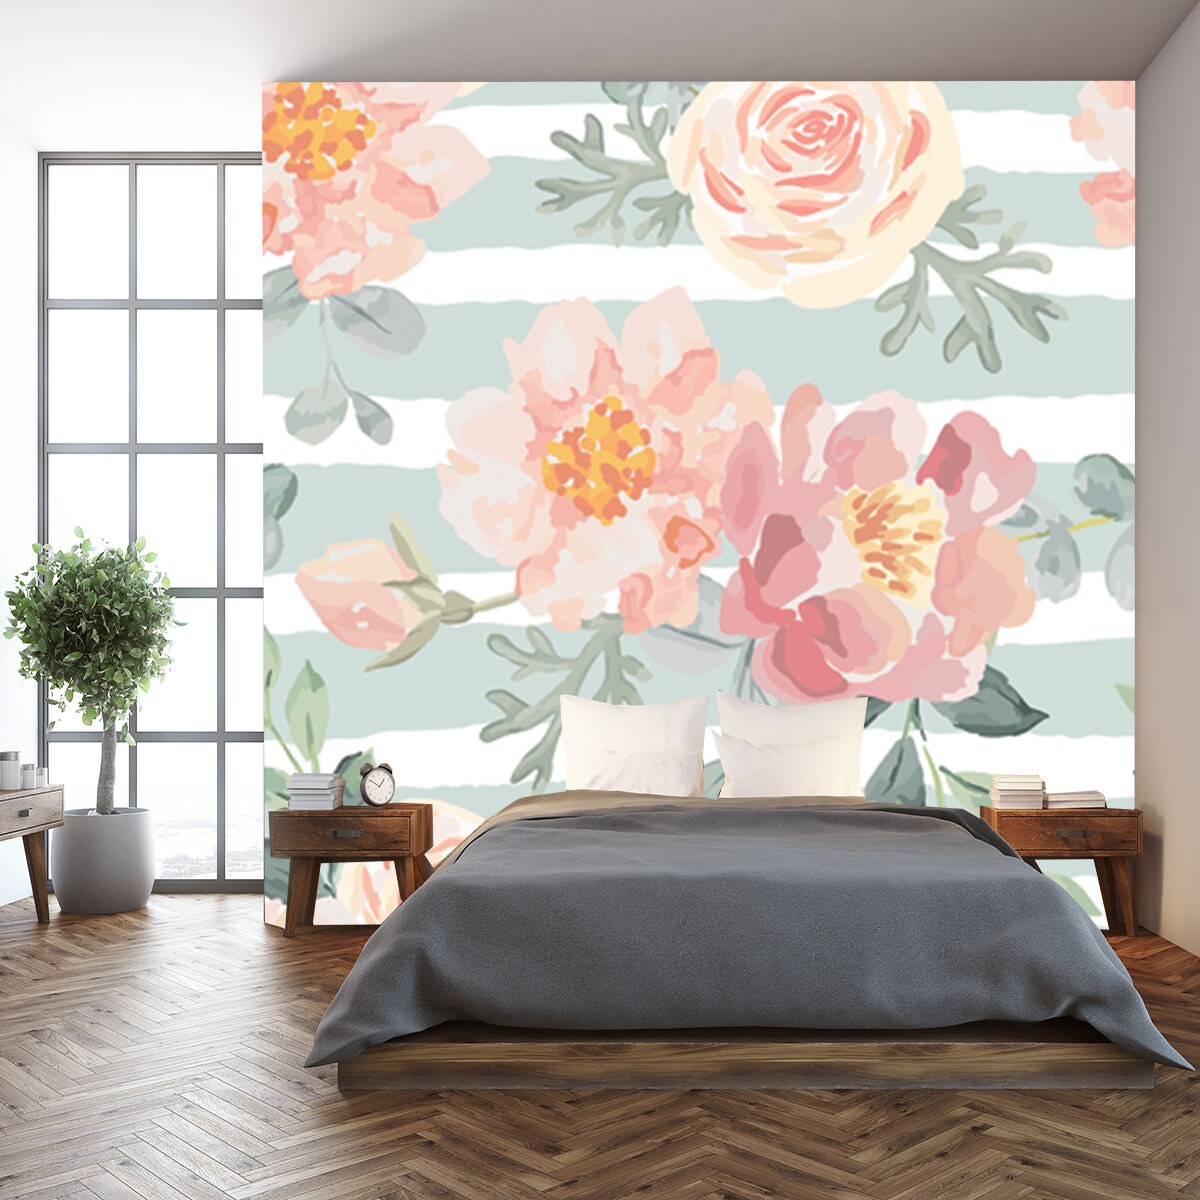 Pale Pink Roses and Peonies with Gray Leaves on the Striped Background Wallpaper Bedroom Mural